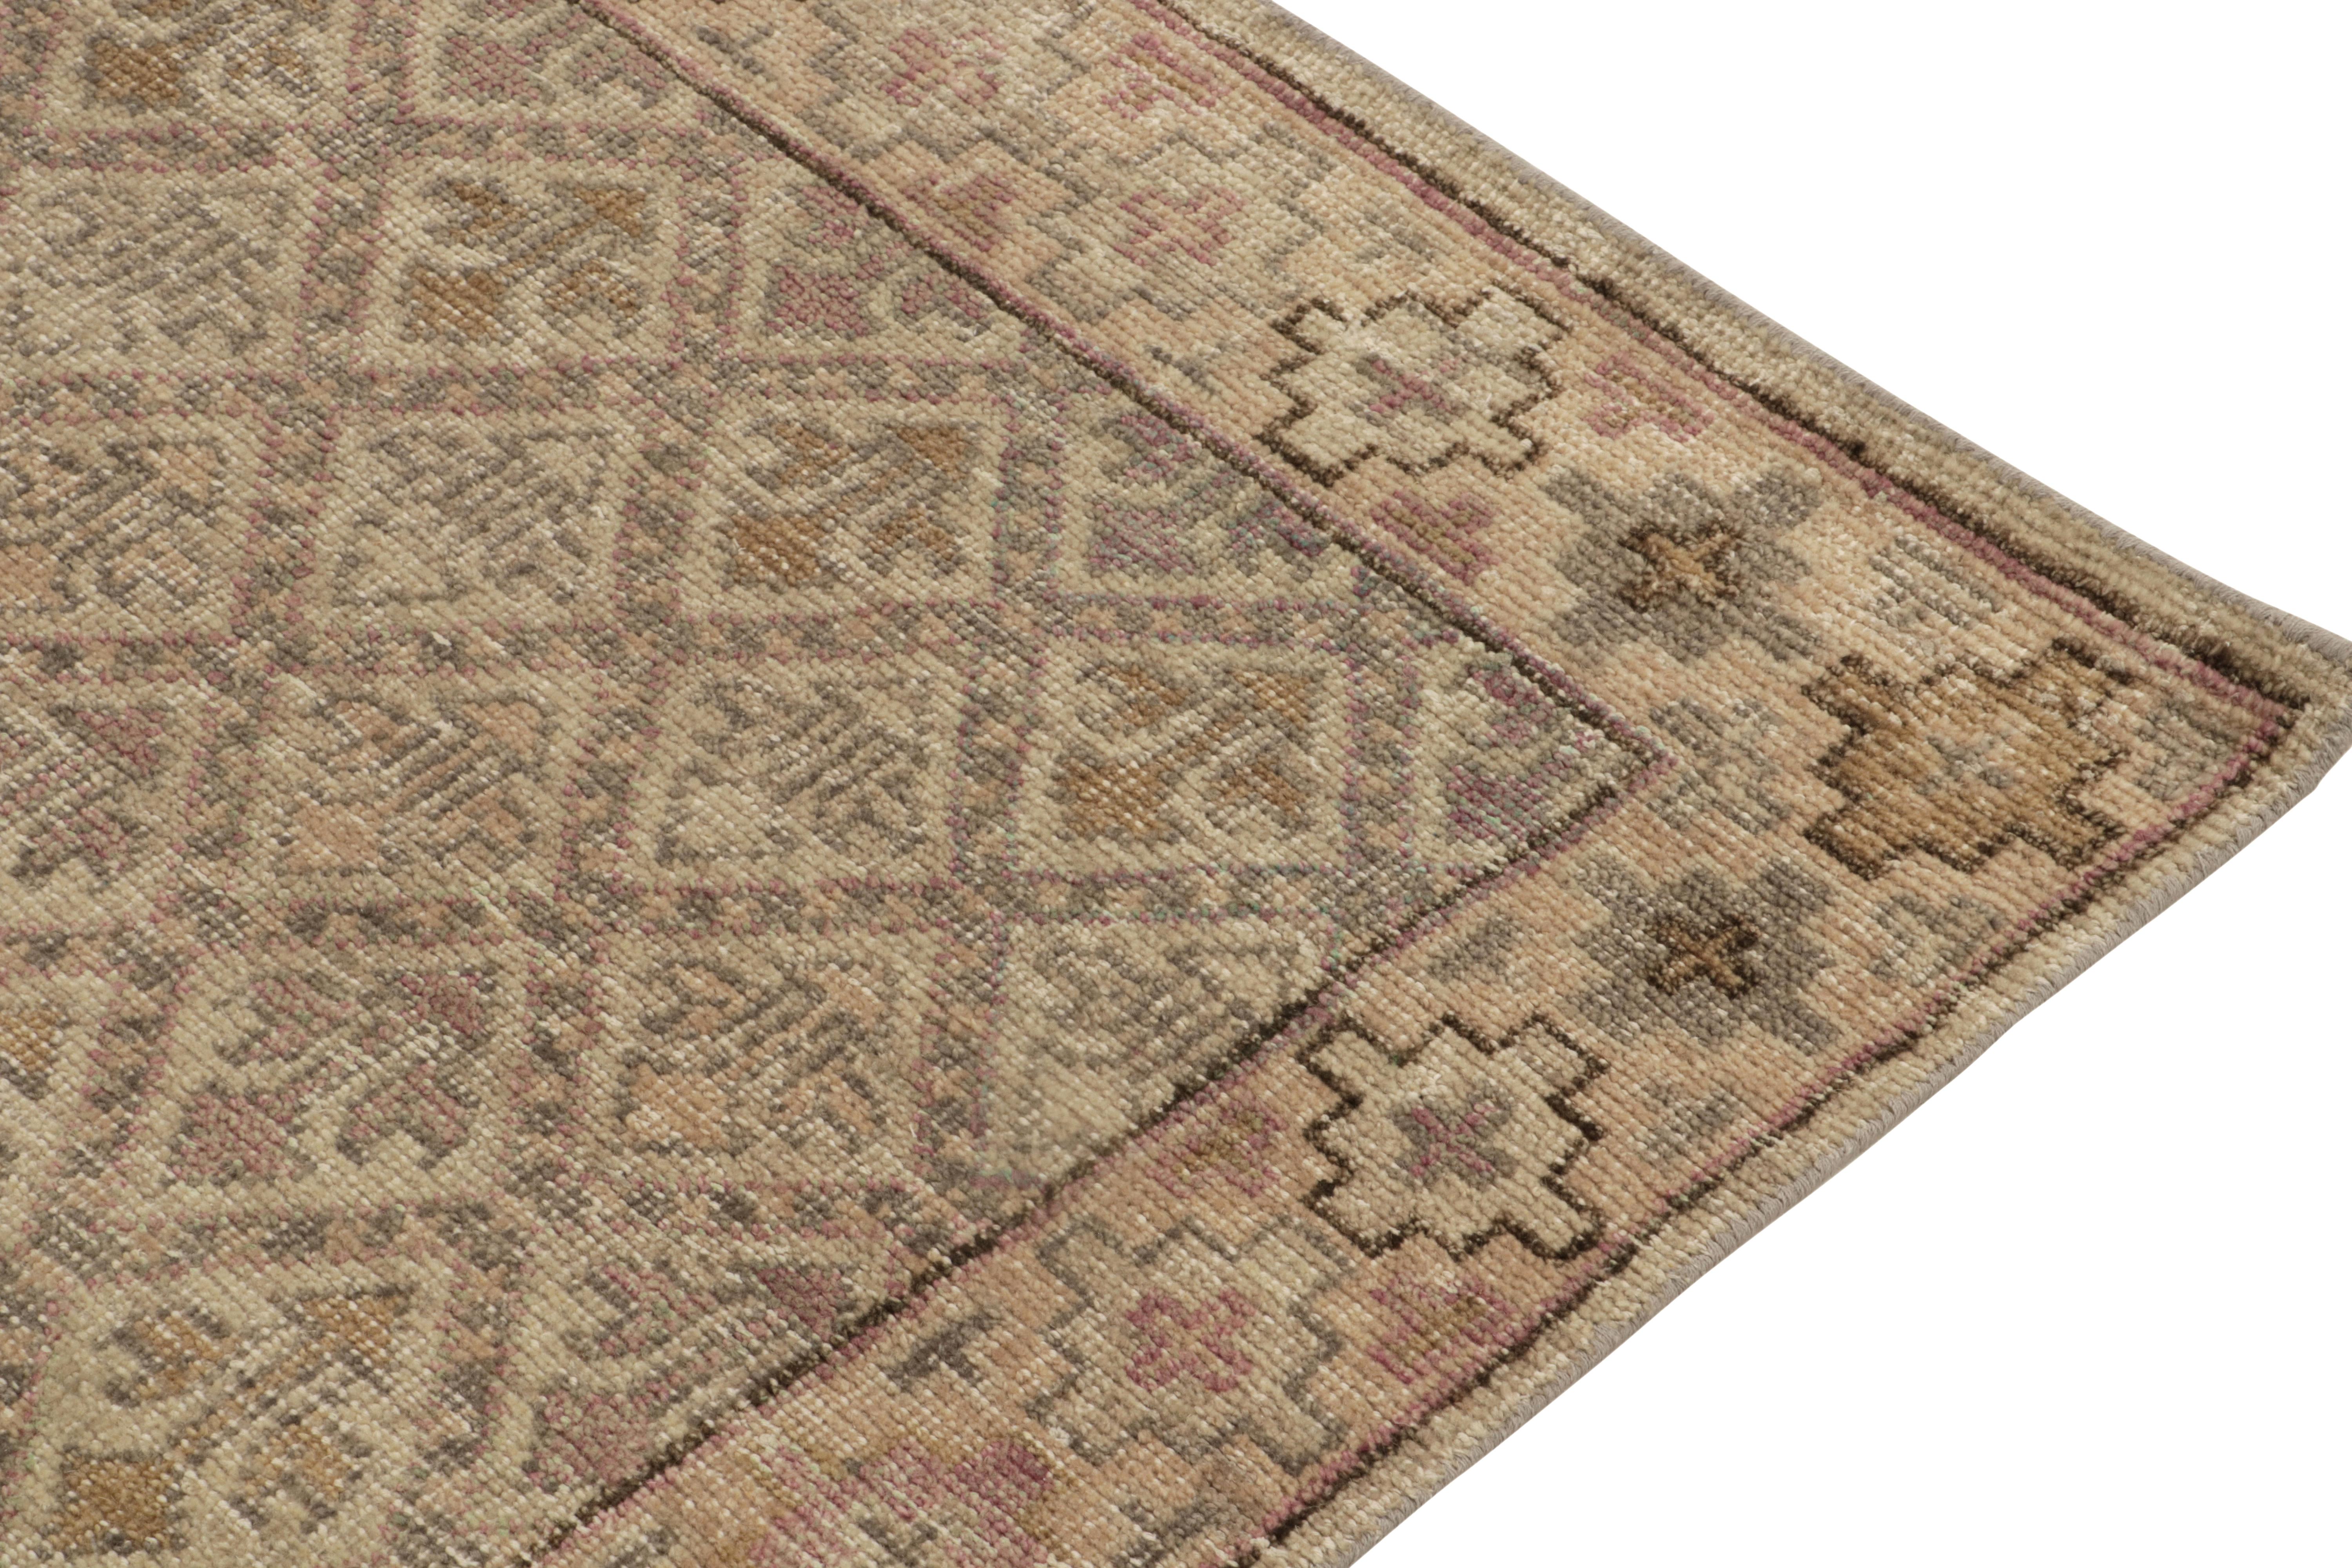 Rug & Kilim’s Distressed Style Runner in Beige-Brown & Grey Tribal Patterns In New Condition For Sale In Long Island City, NY